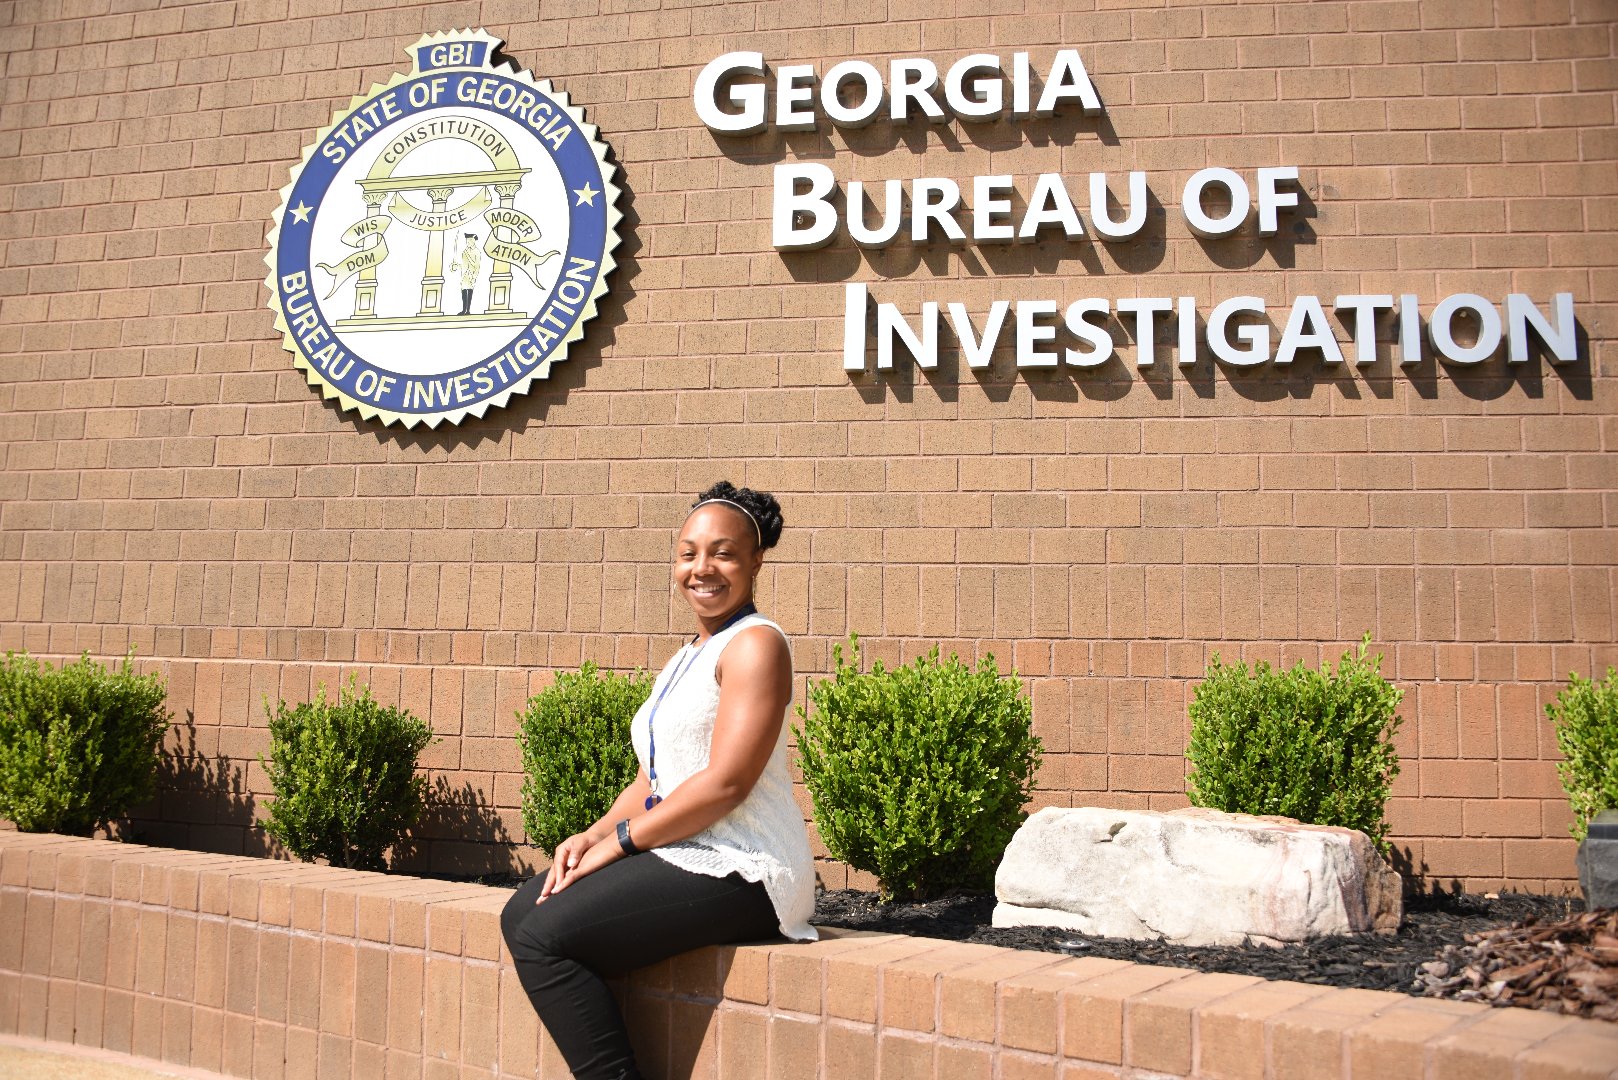 Carissa Jackson is a crime lab scientist at the Georgia Bureau of Investigation headquarters in Decatur, Georgia, where she has worked for a year.